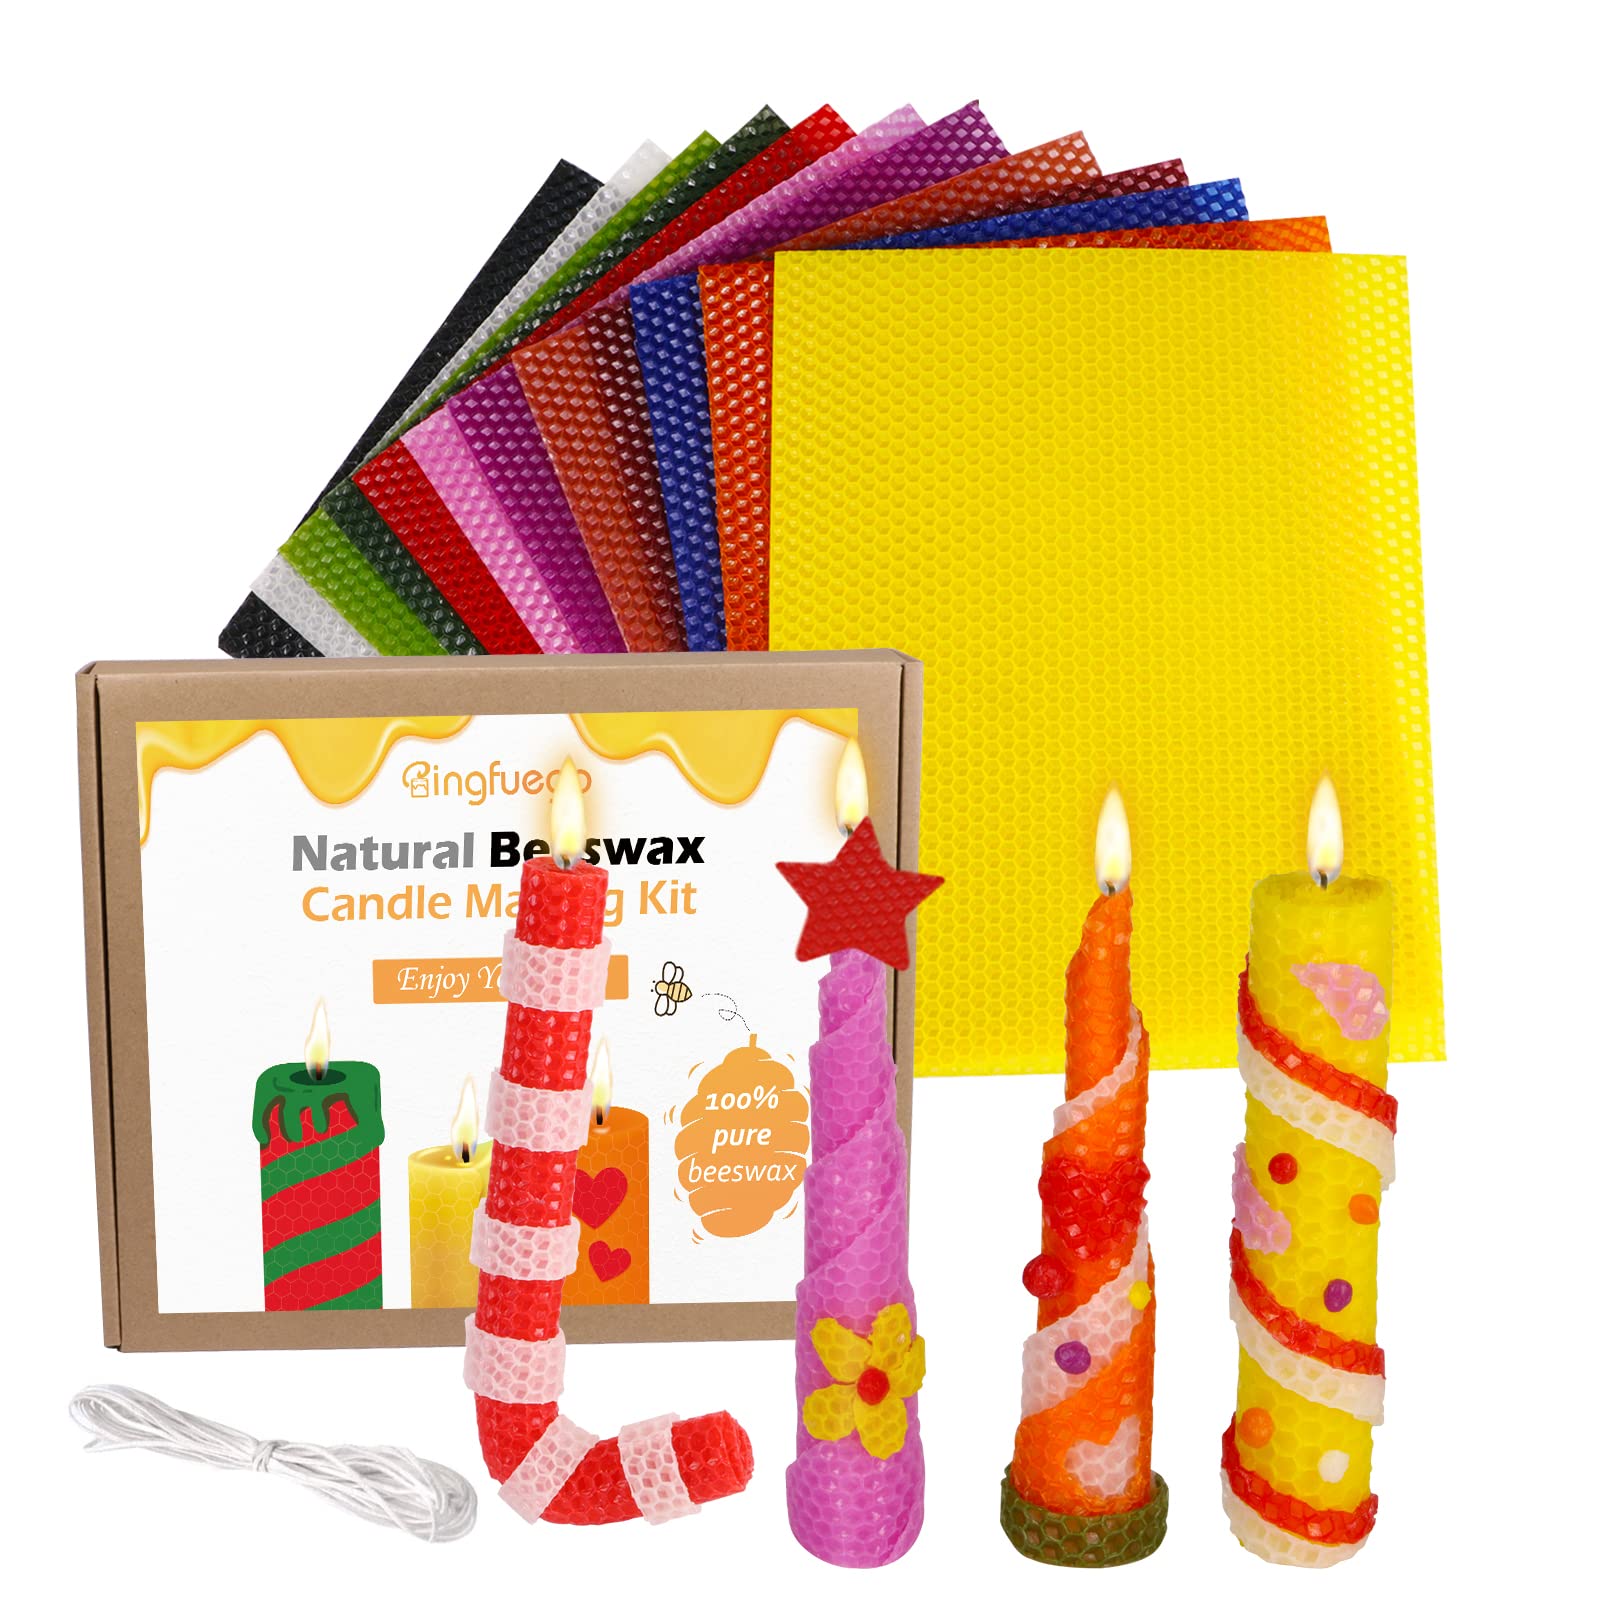 Bingfuego beeswax candle making kit for kids-12 colors beeswax sheets for  candle making, make you own candle making kit for adults, 100